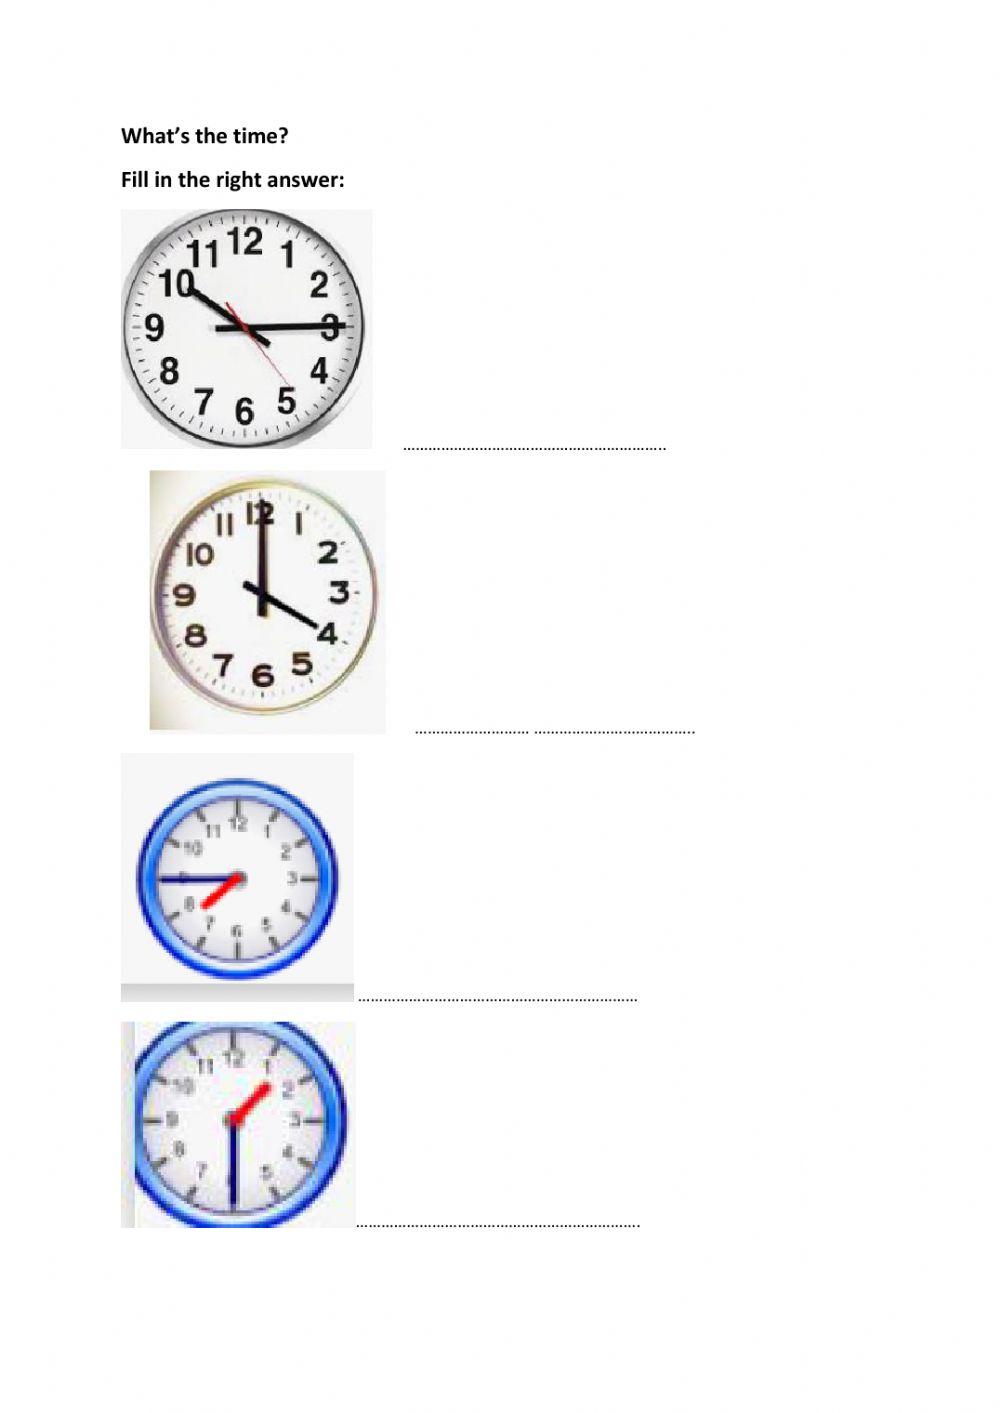 What's the time